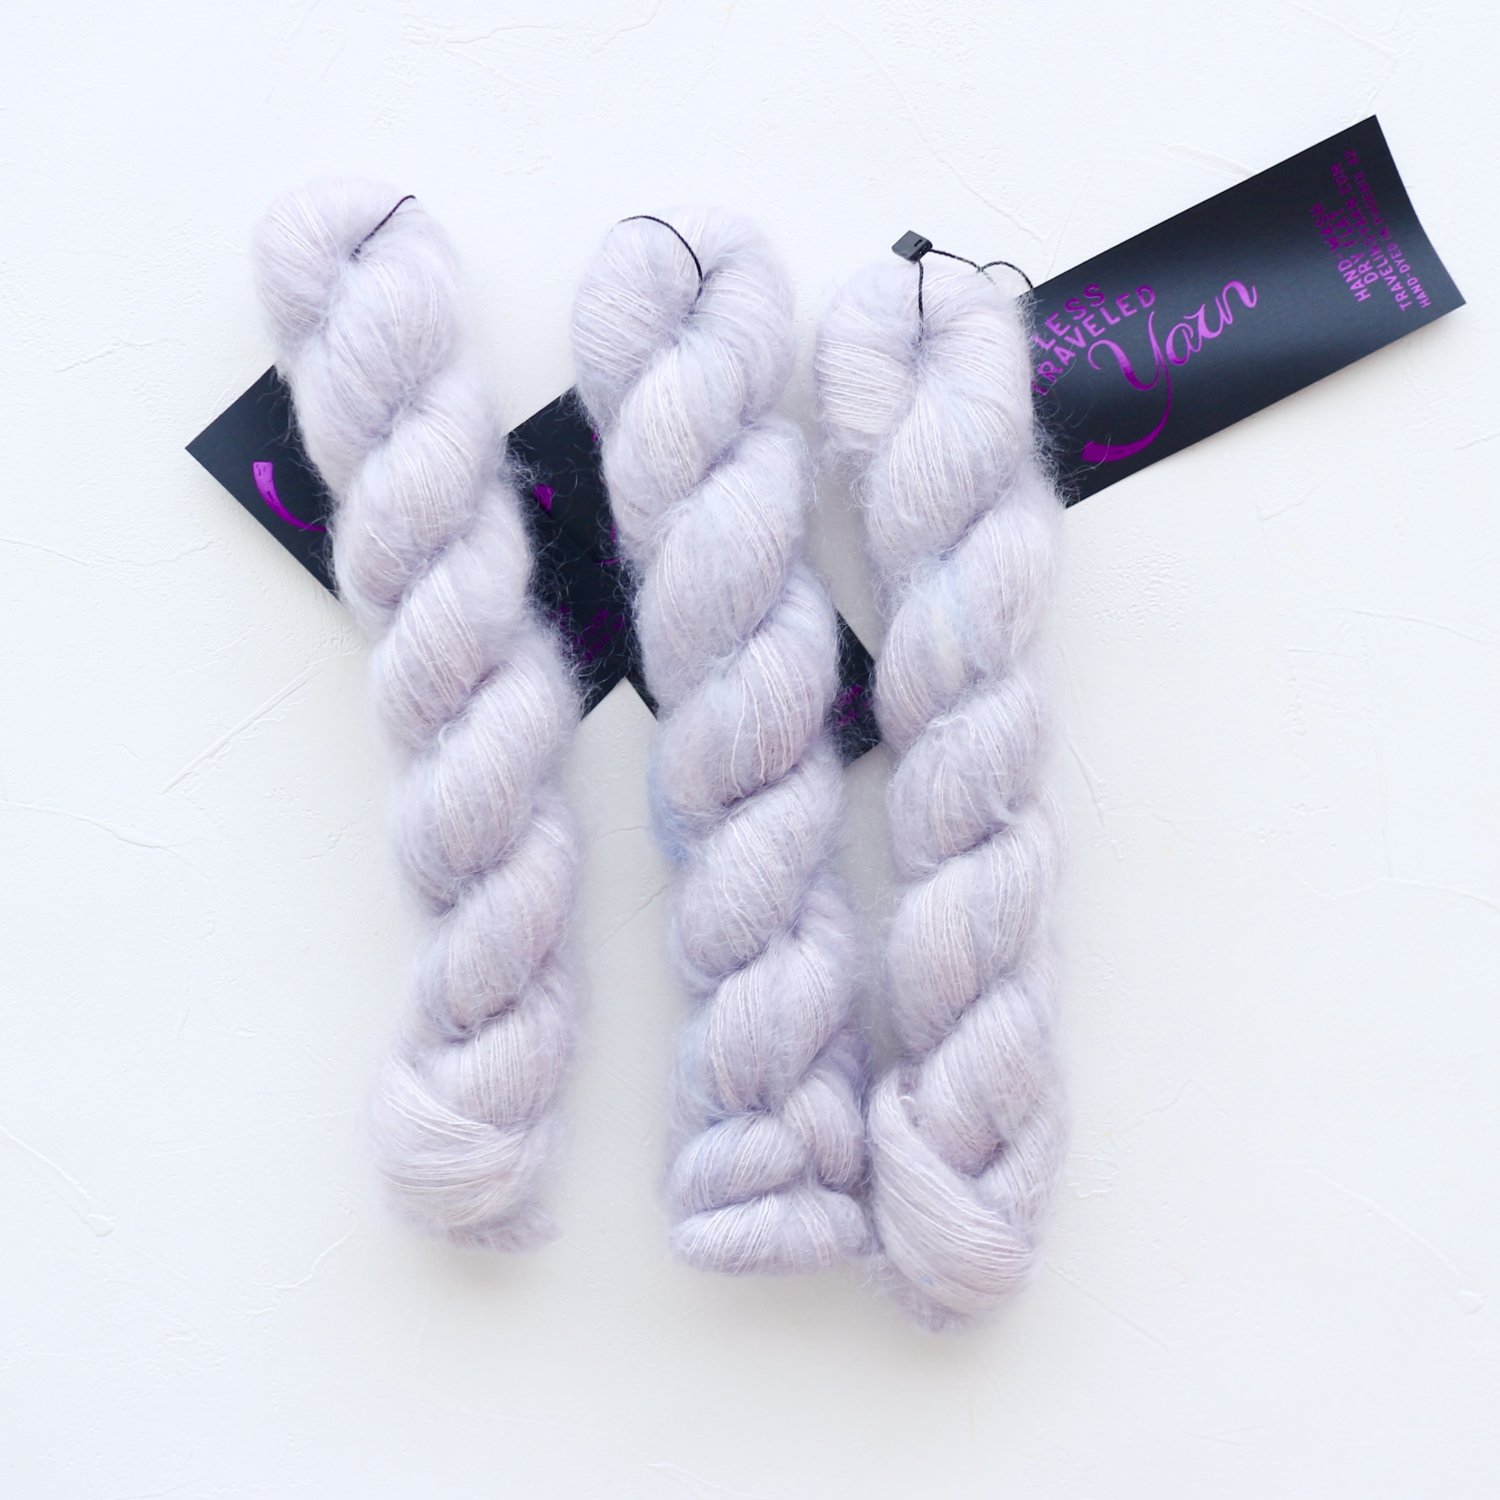 【Less Traveled Yarn】<br>Kid Mohair<br>Essence of Lilac